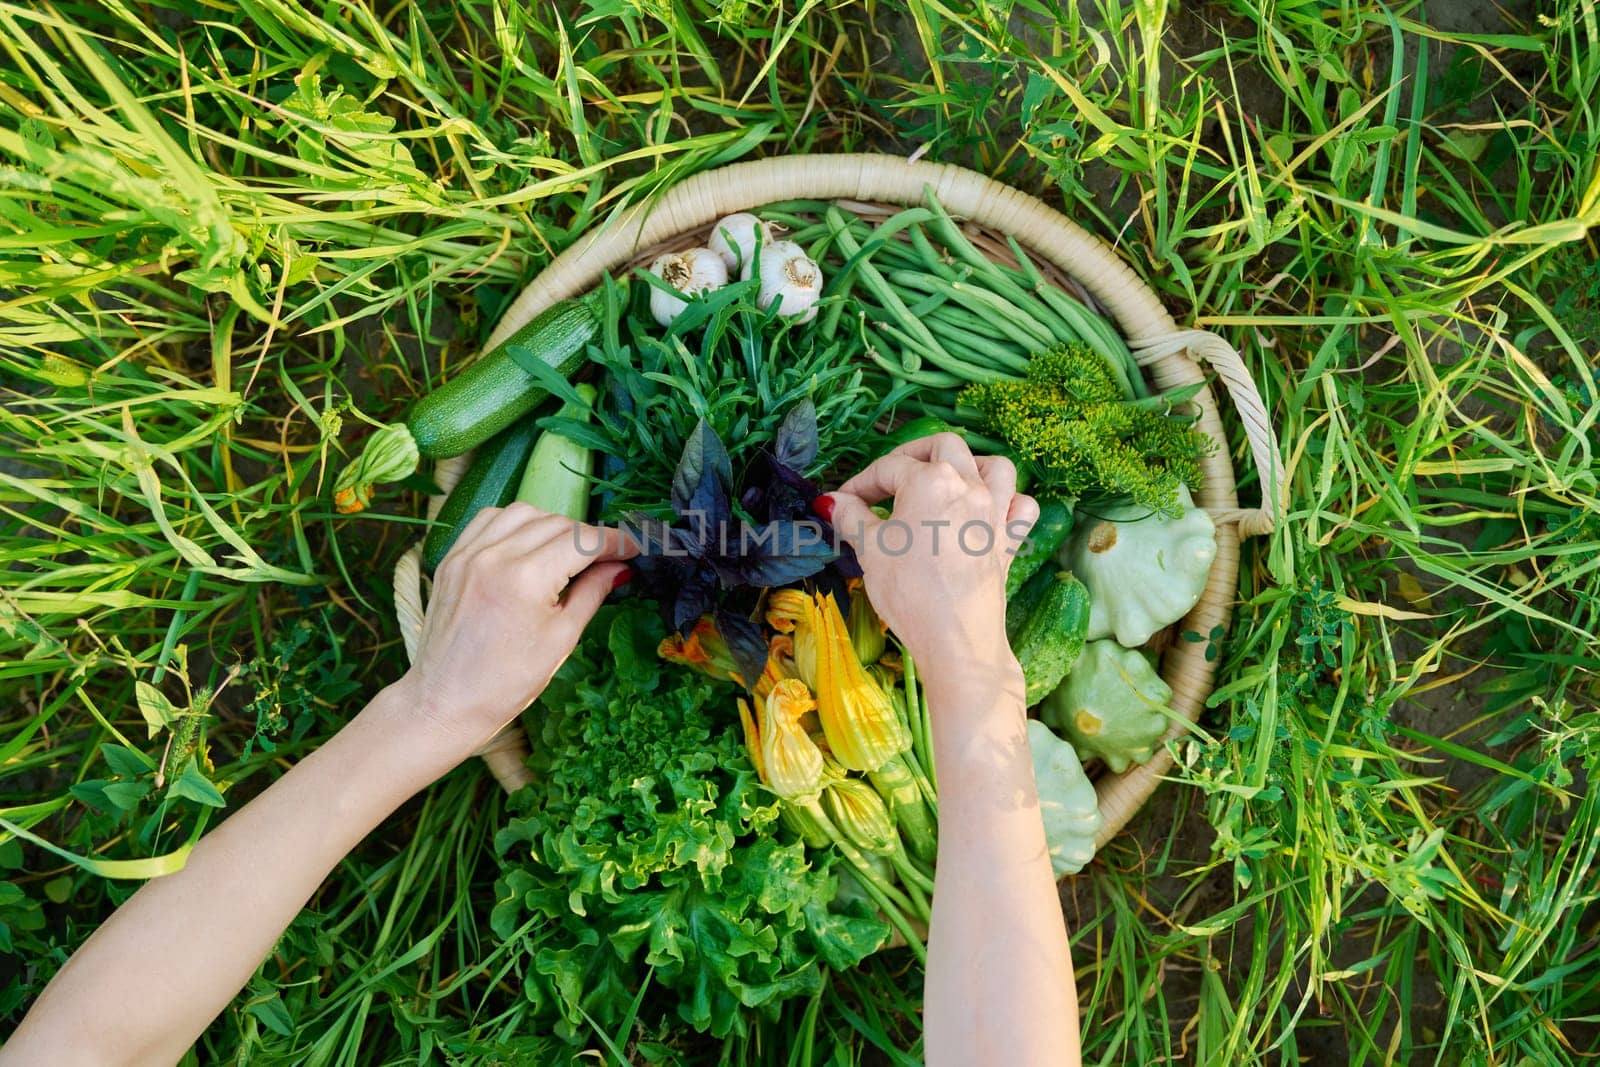 Top view hands picking vegetable green basket, summer harvest, background nature grass in sunlight. Ingredients zucchini cucumbers lettuce leaves garlic squash arugula basil, farmers market